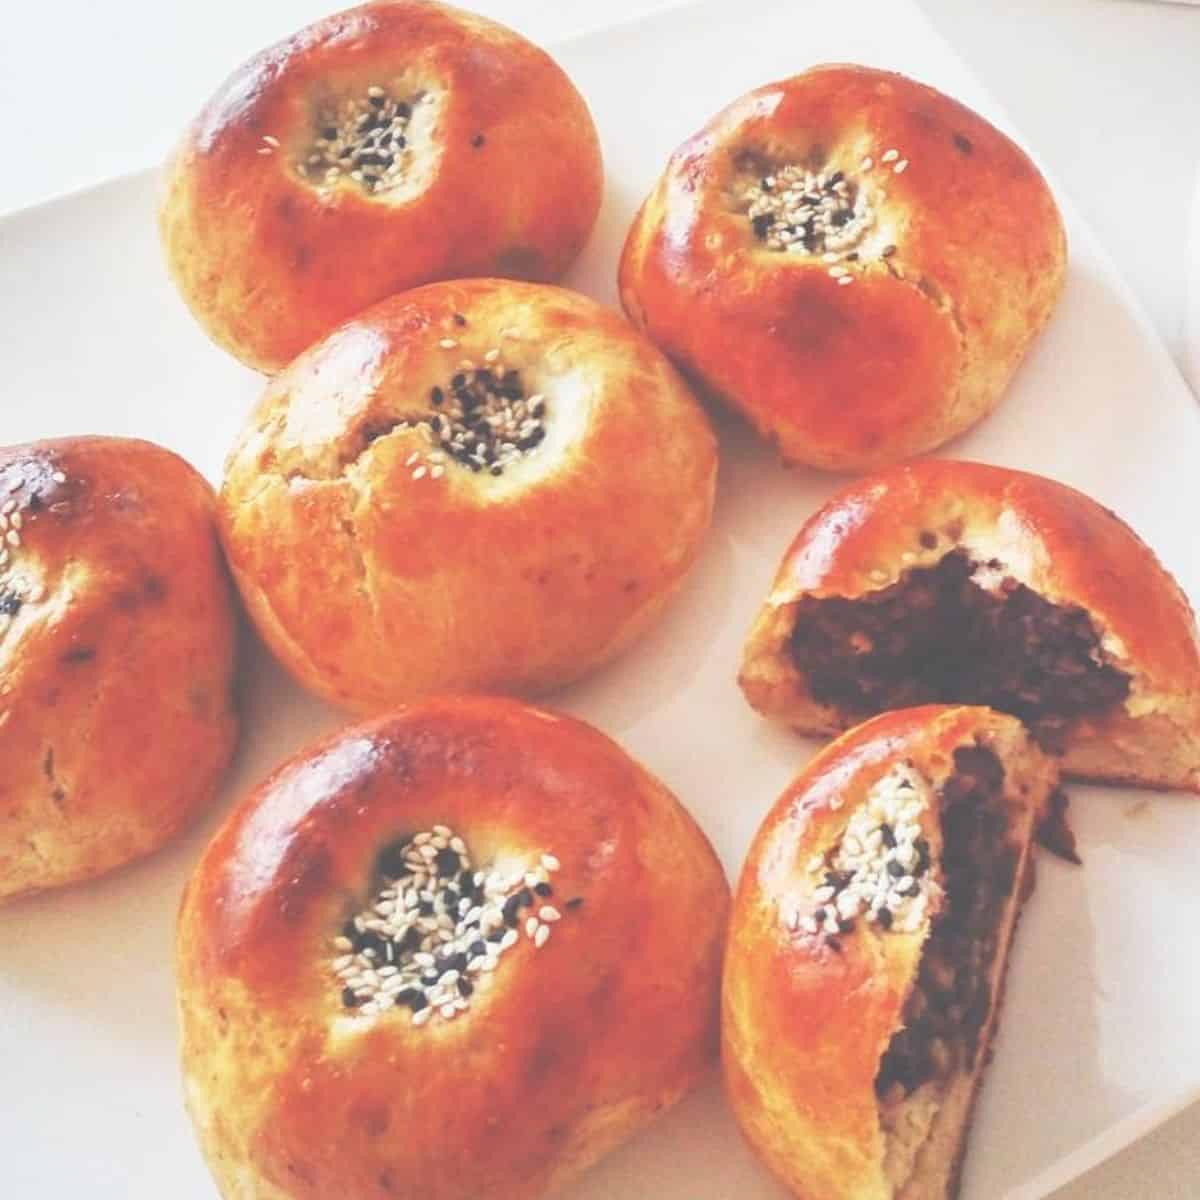 Anpan with black and white seasame seeds, filled with red bean paste